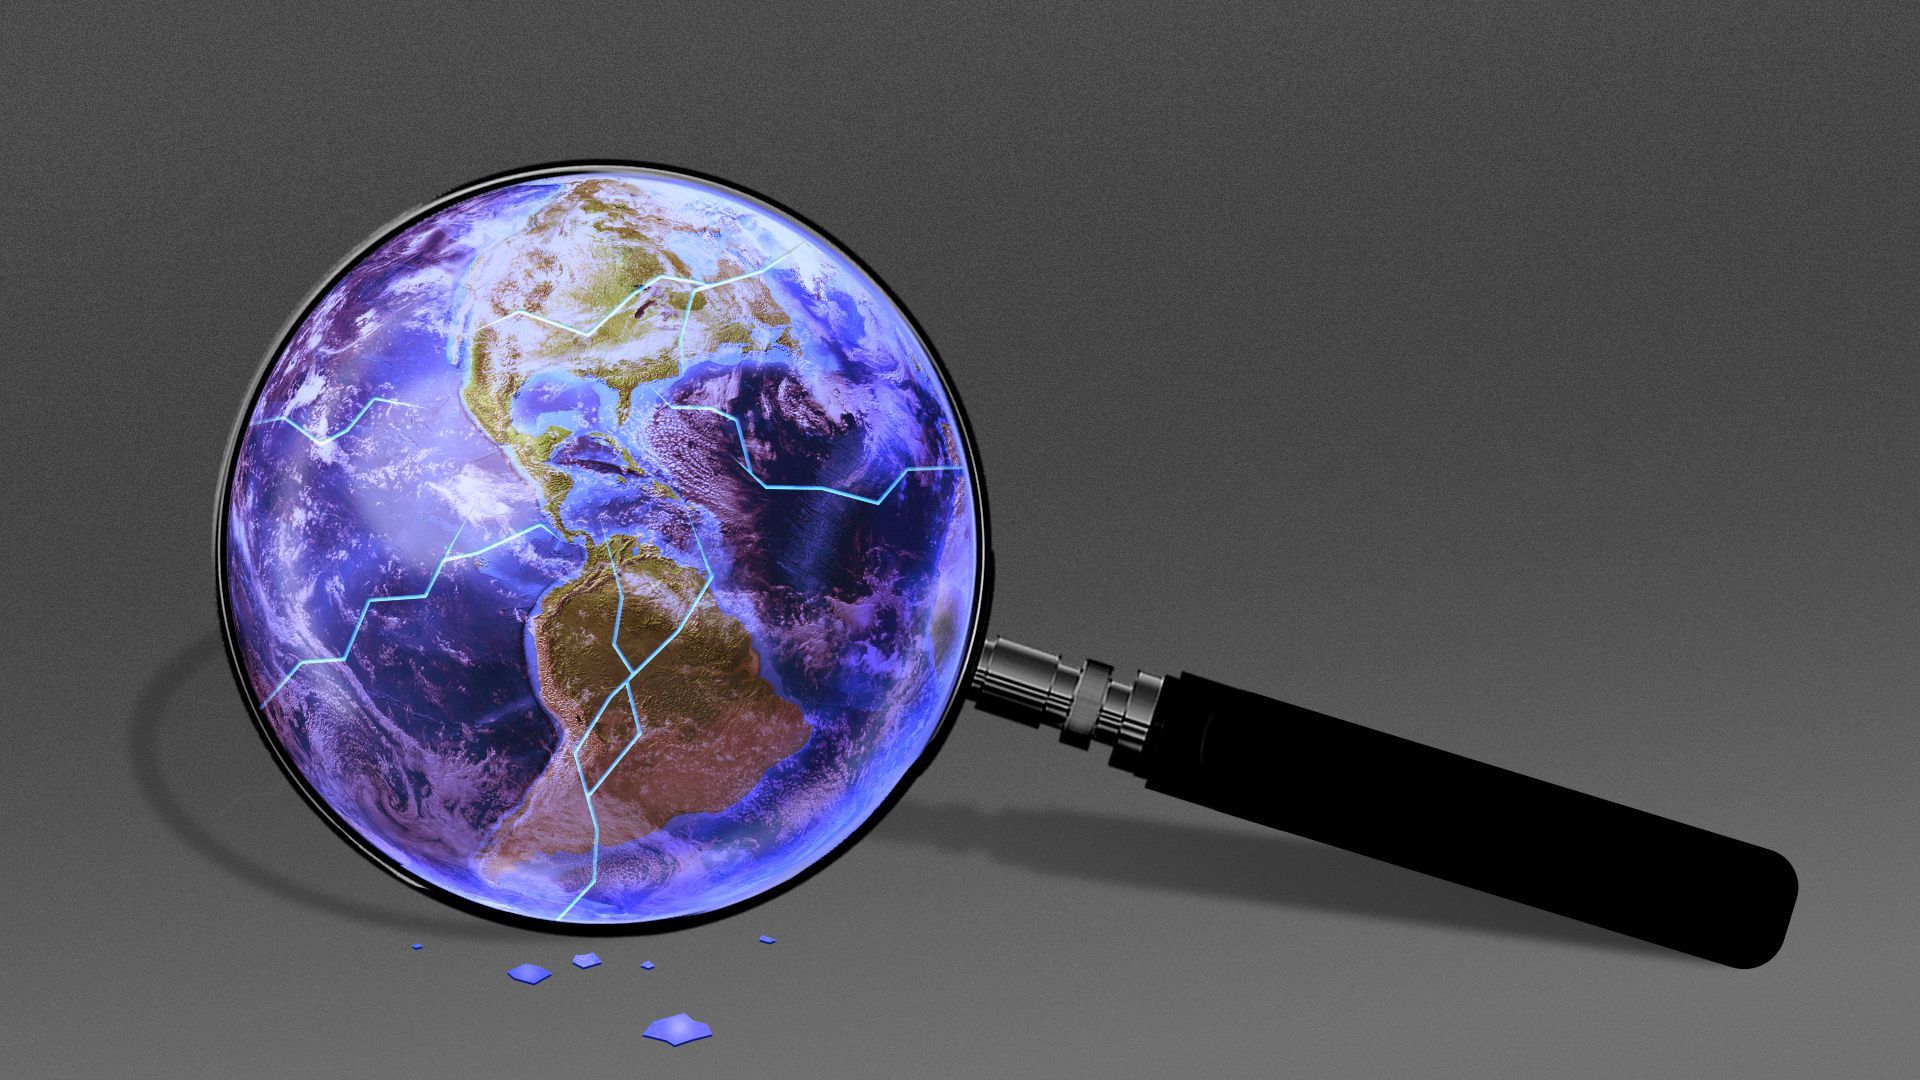 Illustration of a cracked magnifying glass showing the earth